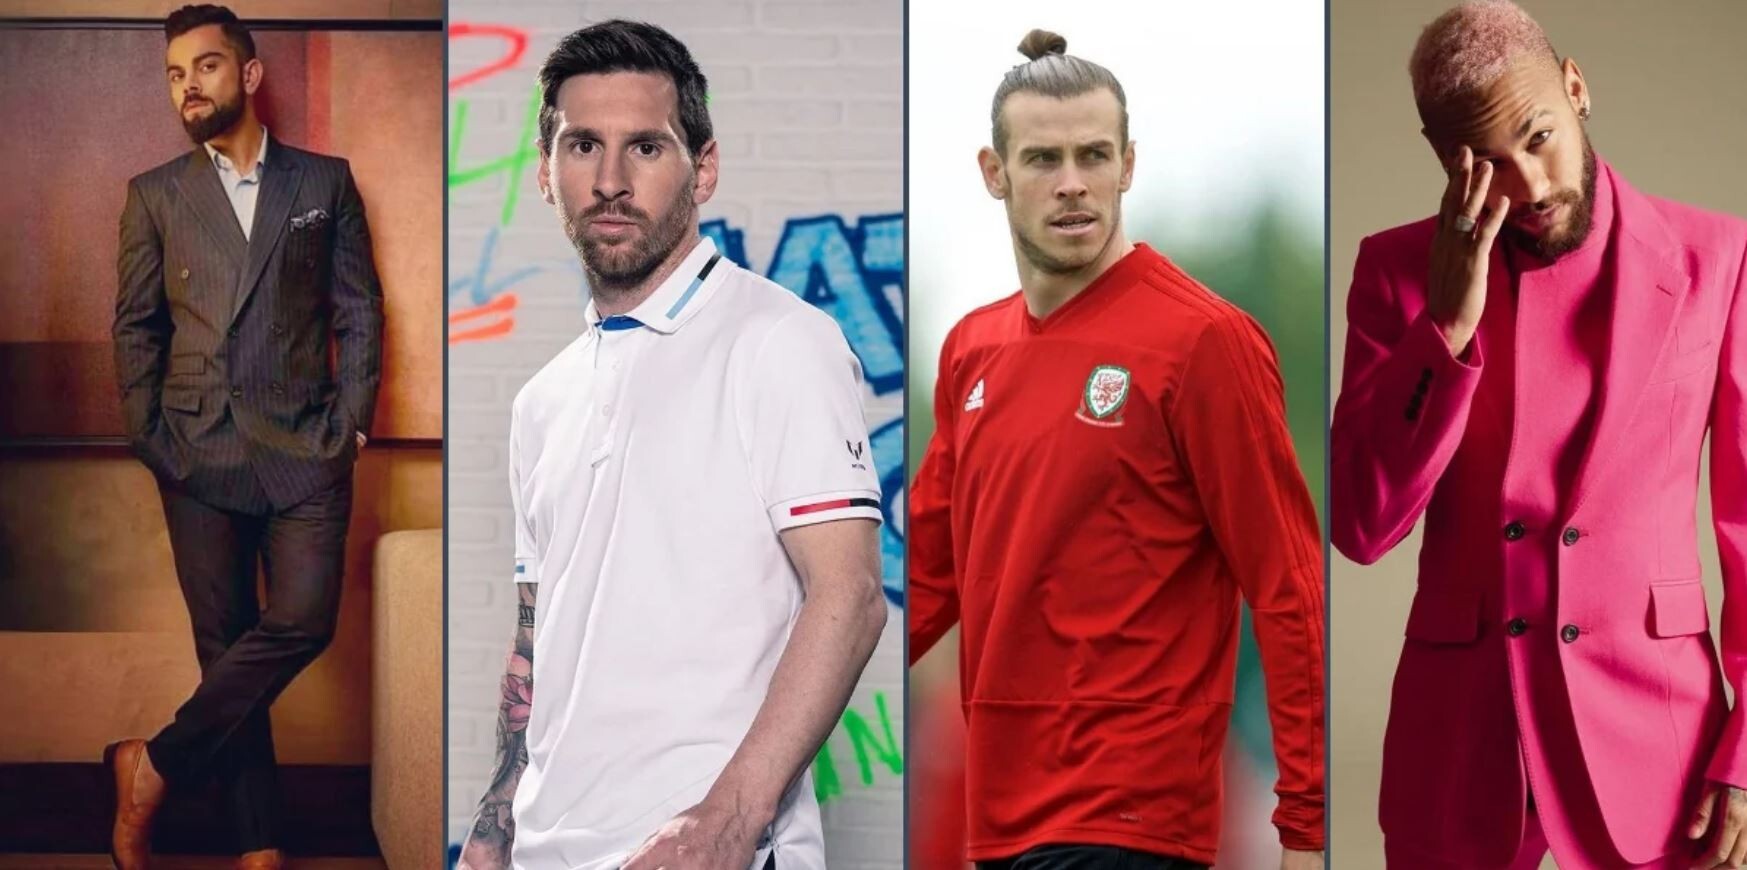 Messi, Bale and Neymar can earn from US$200,000 up to US$900,000 with a single click. Photo: Luxurylaunches/Instagram